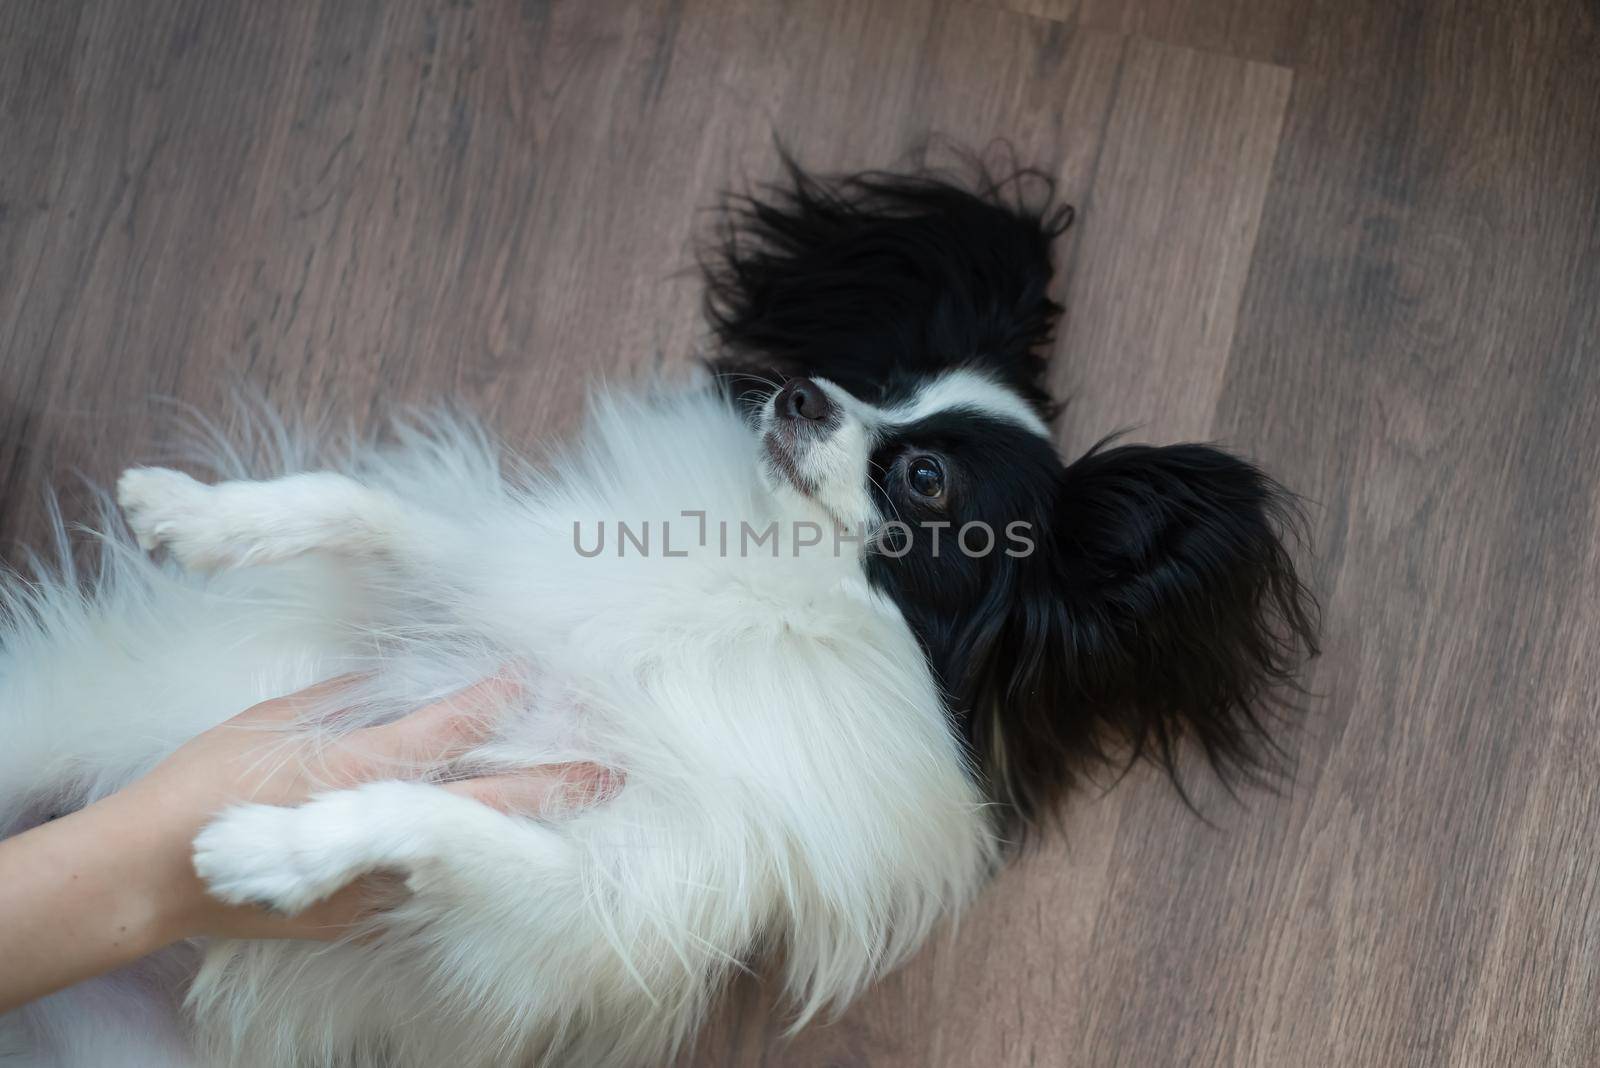 Funny shepherd dog on a dark wooden floor. Papillon dog butterfly by mrwed54